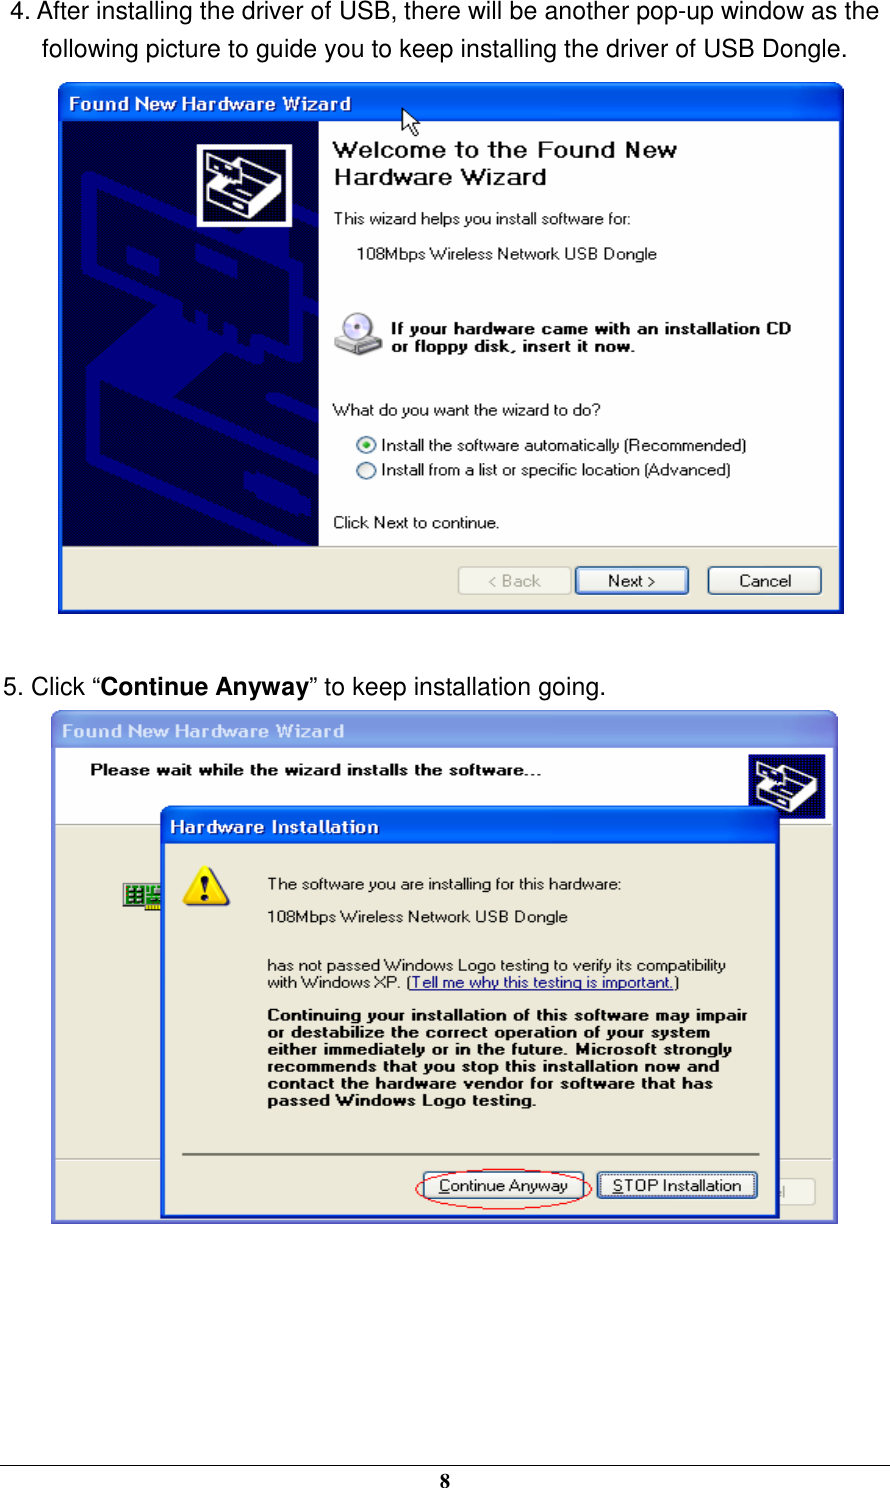  8 4. After installing the driver of USB, there will be another pop-up window as the following picture to guide you to keep installing the driver of USB Dongle.     5. Click “Continue Anyway” to keep installation going.       